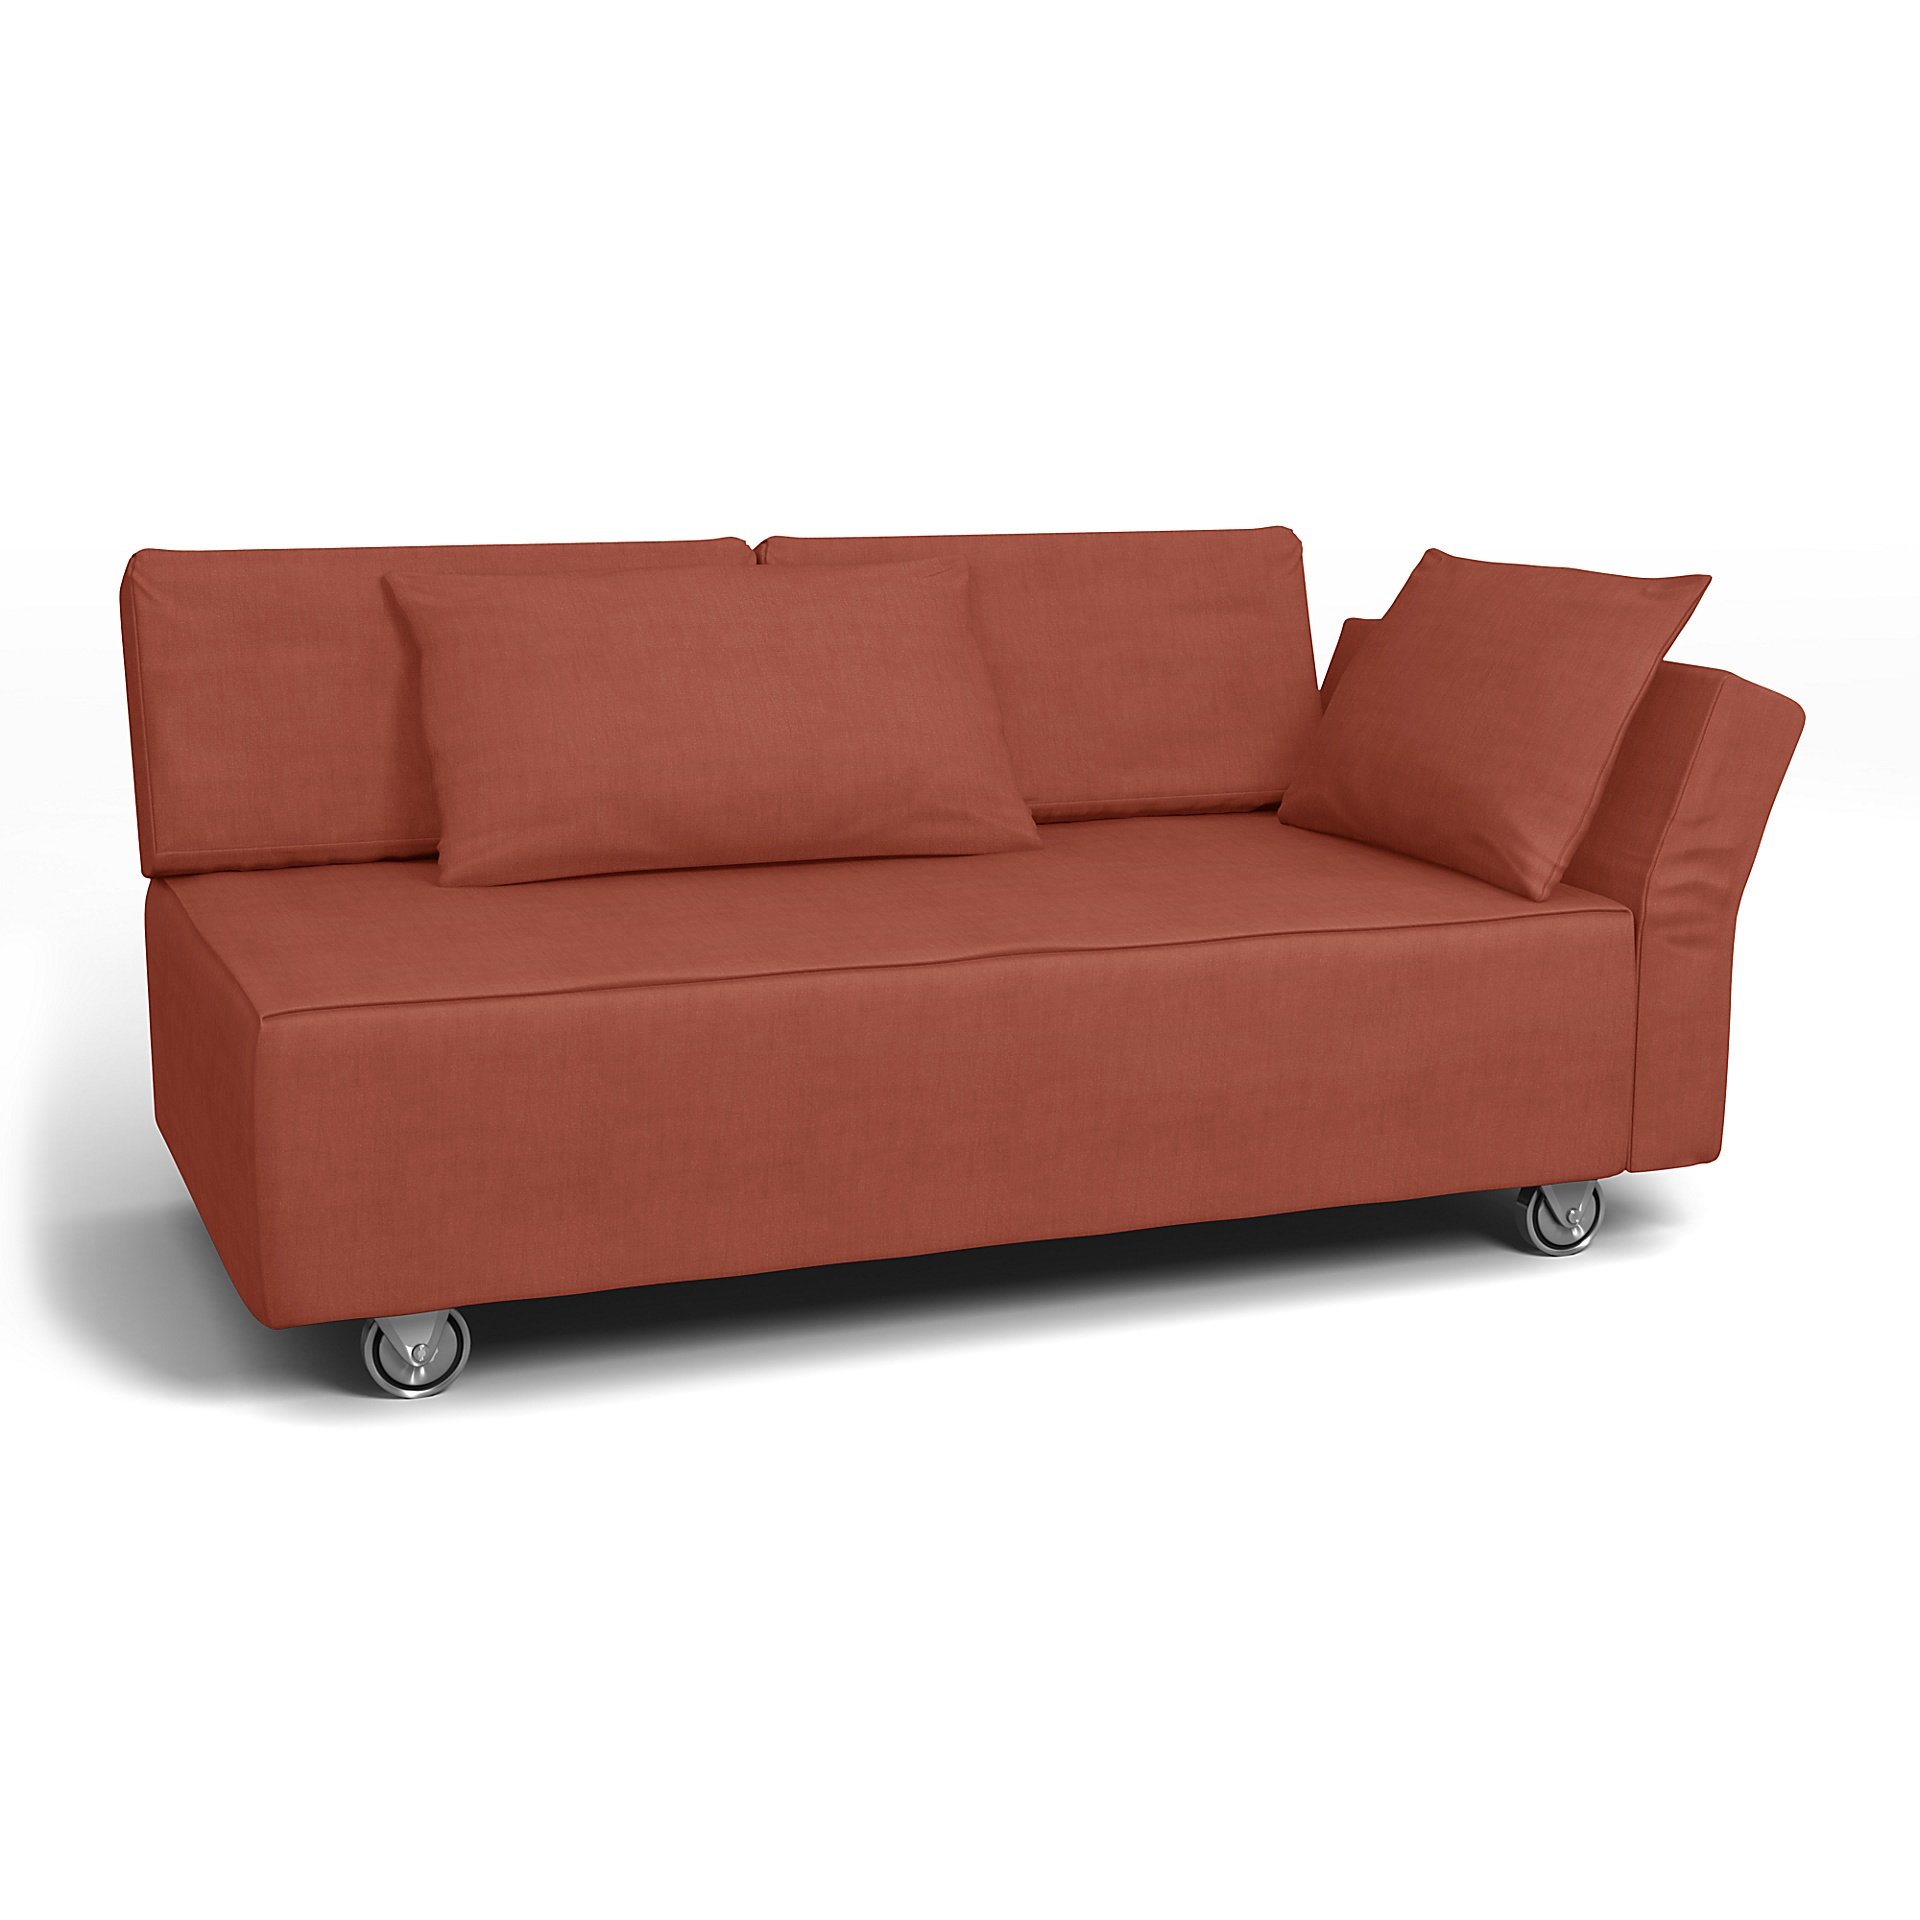 IKEA - Falsterbo 2 Seat Sofa with Right Arm Cover, Terracotta, Linen - Bemz